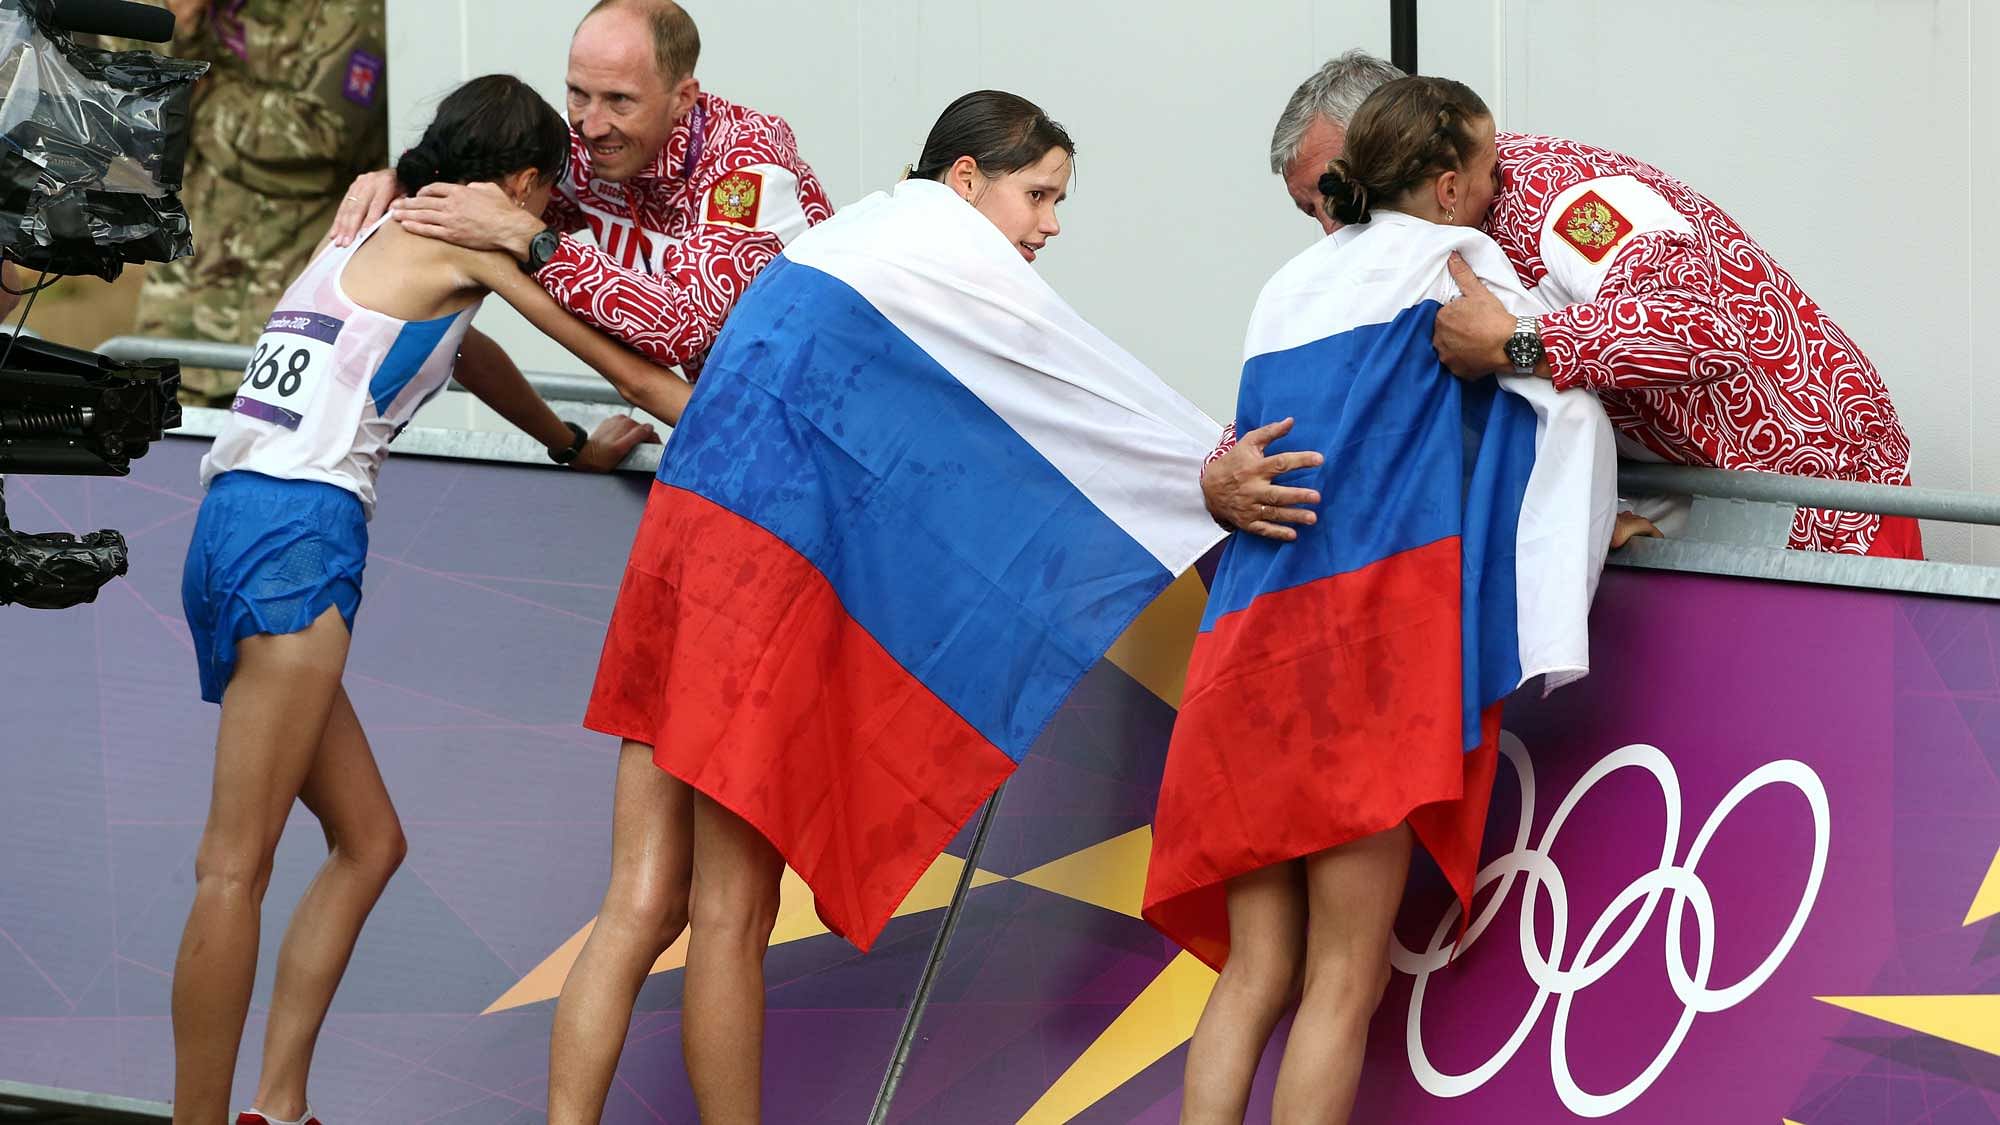 File photo of Russia’s track athletes at the  2012 Summer Olympics in London.